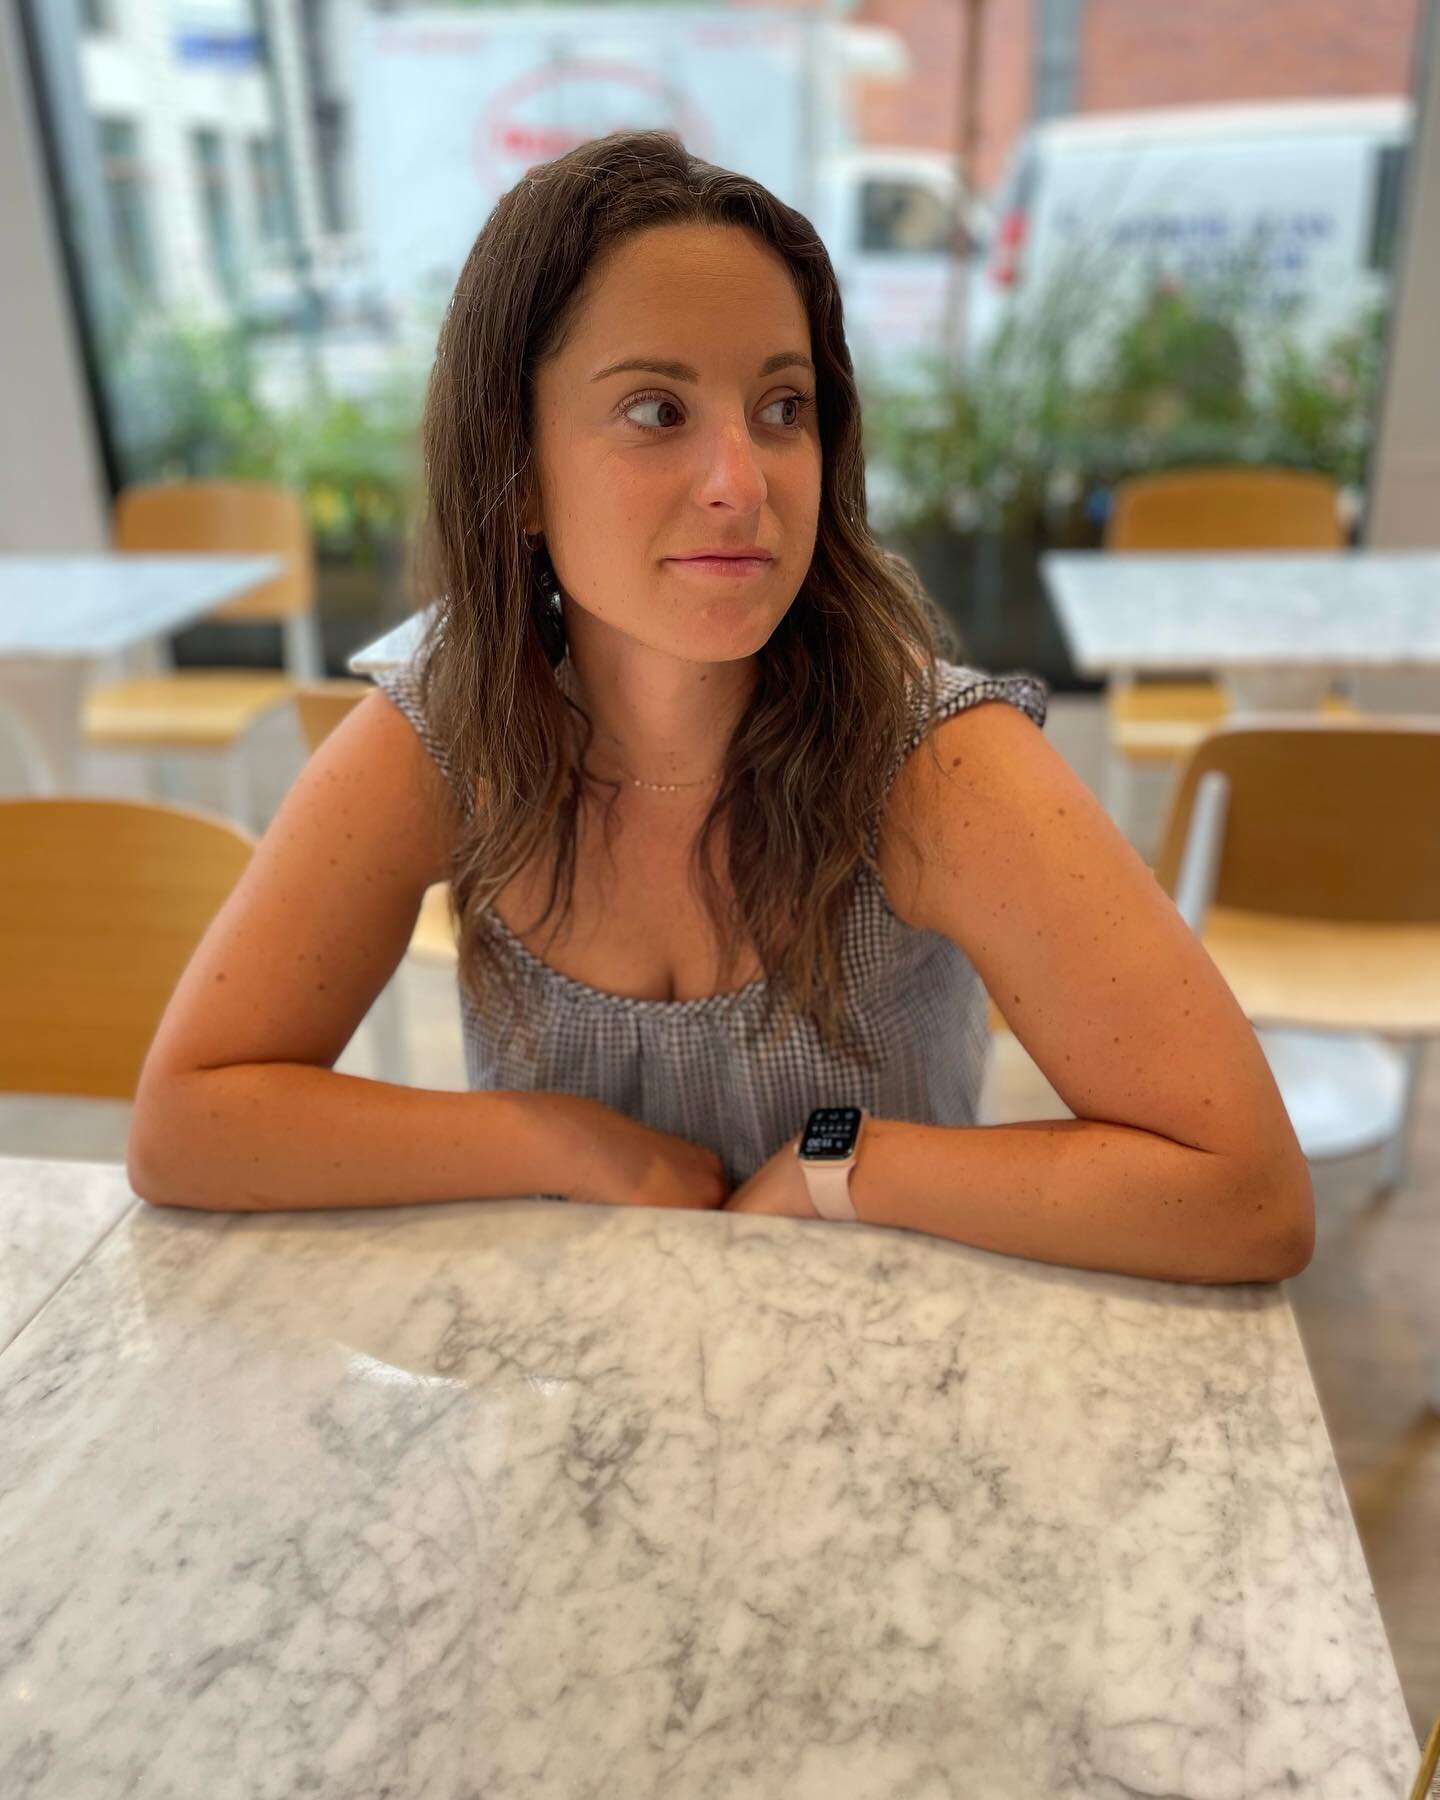 Distracted because I have order envy and re-thinking my brunch choice. 🤪

Hi, nice to meet you.

I&rsquo;m Rachel, a Hoboken-based Food and Mental Health Registered Dietitian. I&rsquo;m the founder of Rachel Naar Nutrition, where we offer virtual 1: